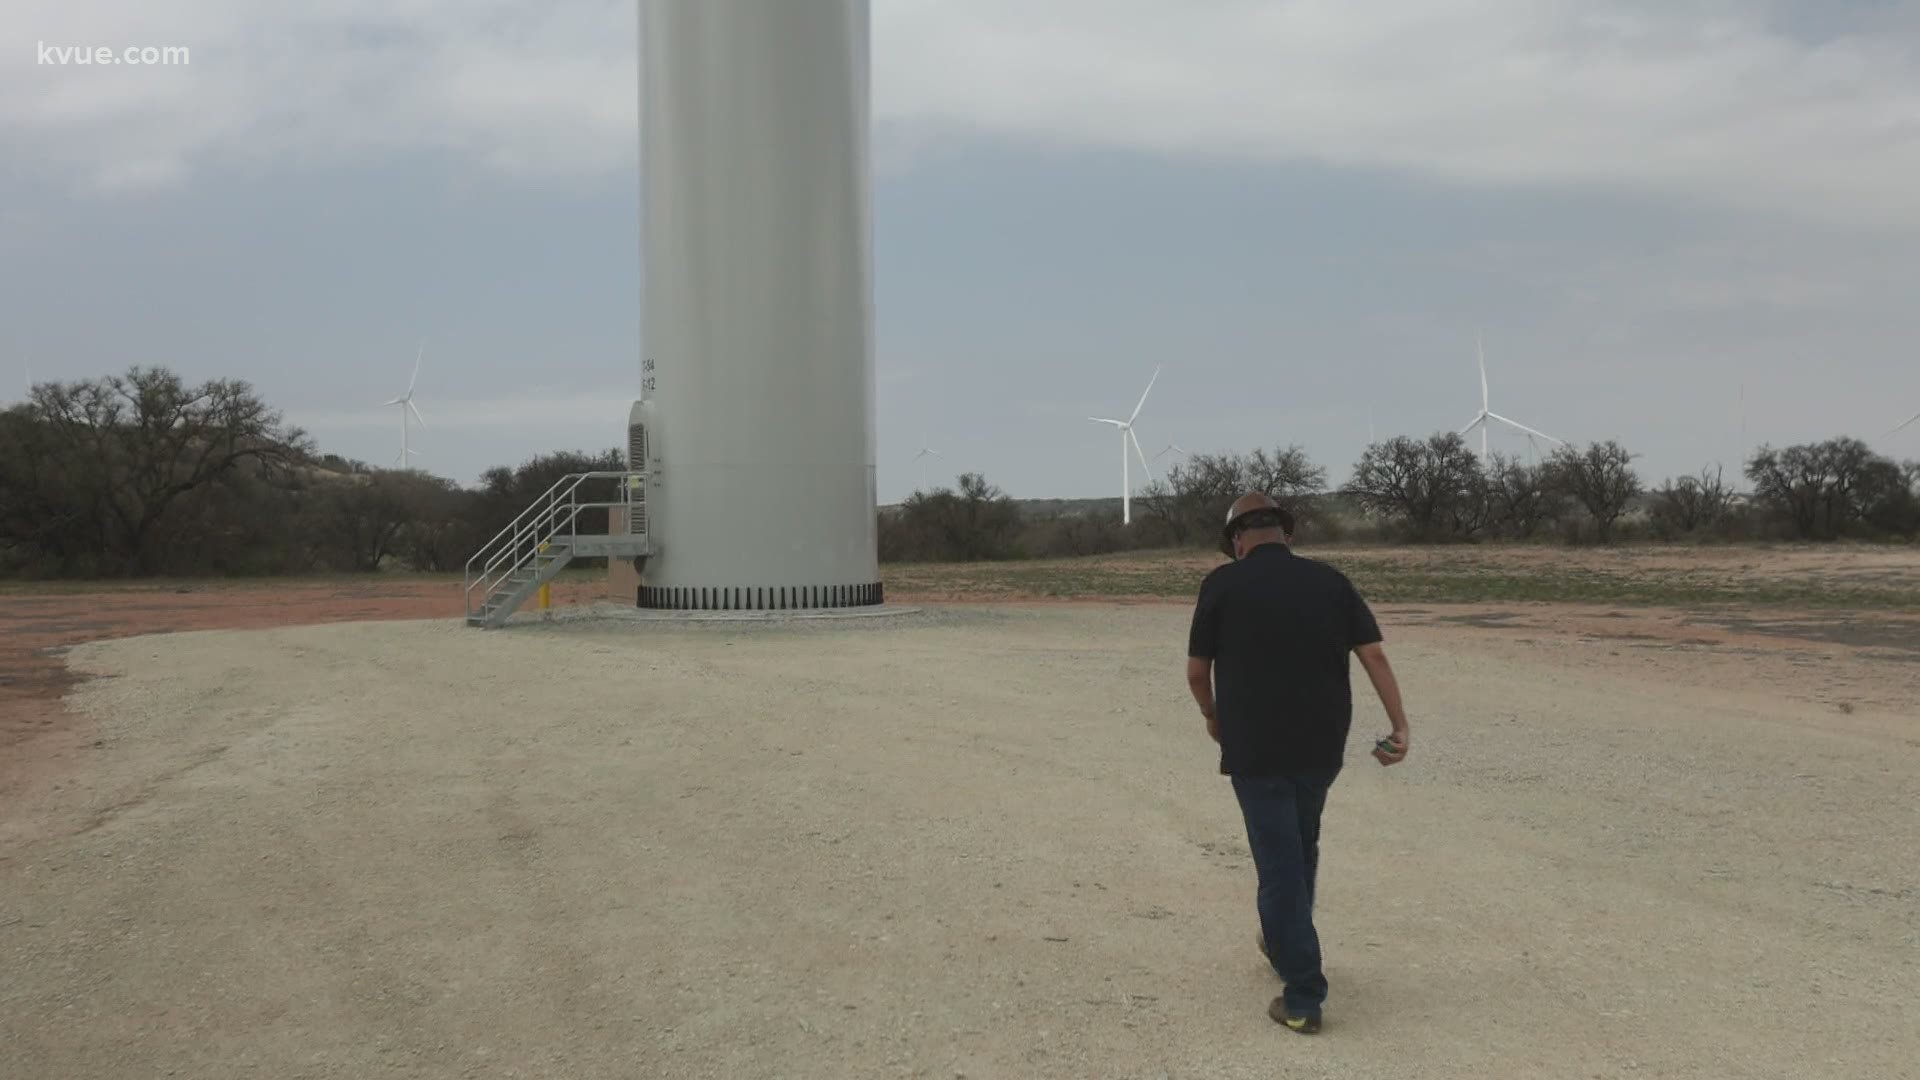 We're diving into Texas wind energy. KVUE traveled to Brady, Texas, to get an in depth look at how things work at wind farms.